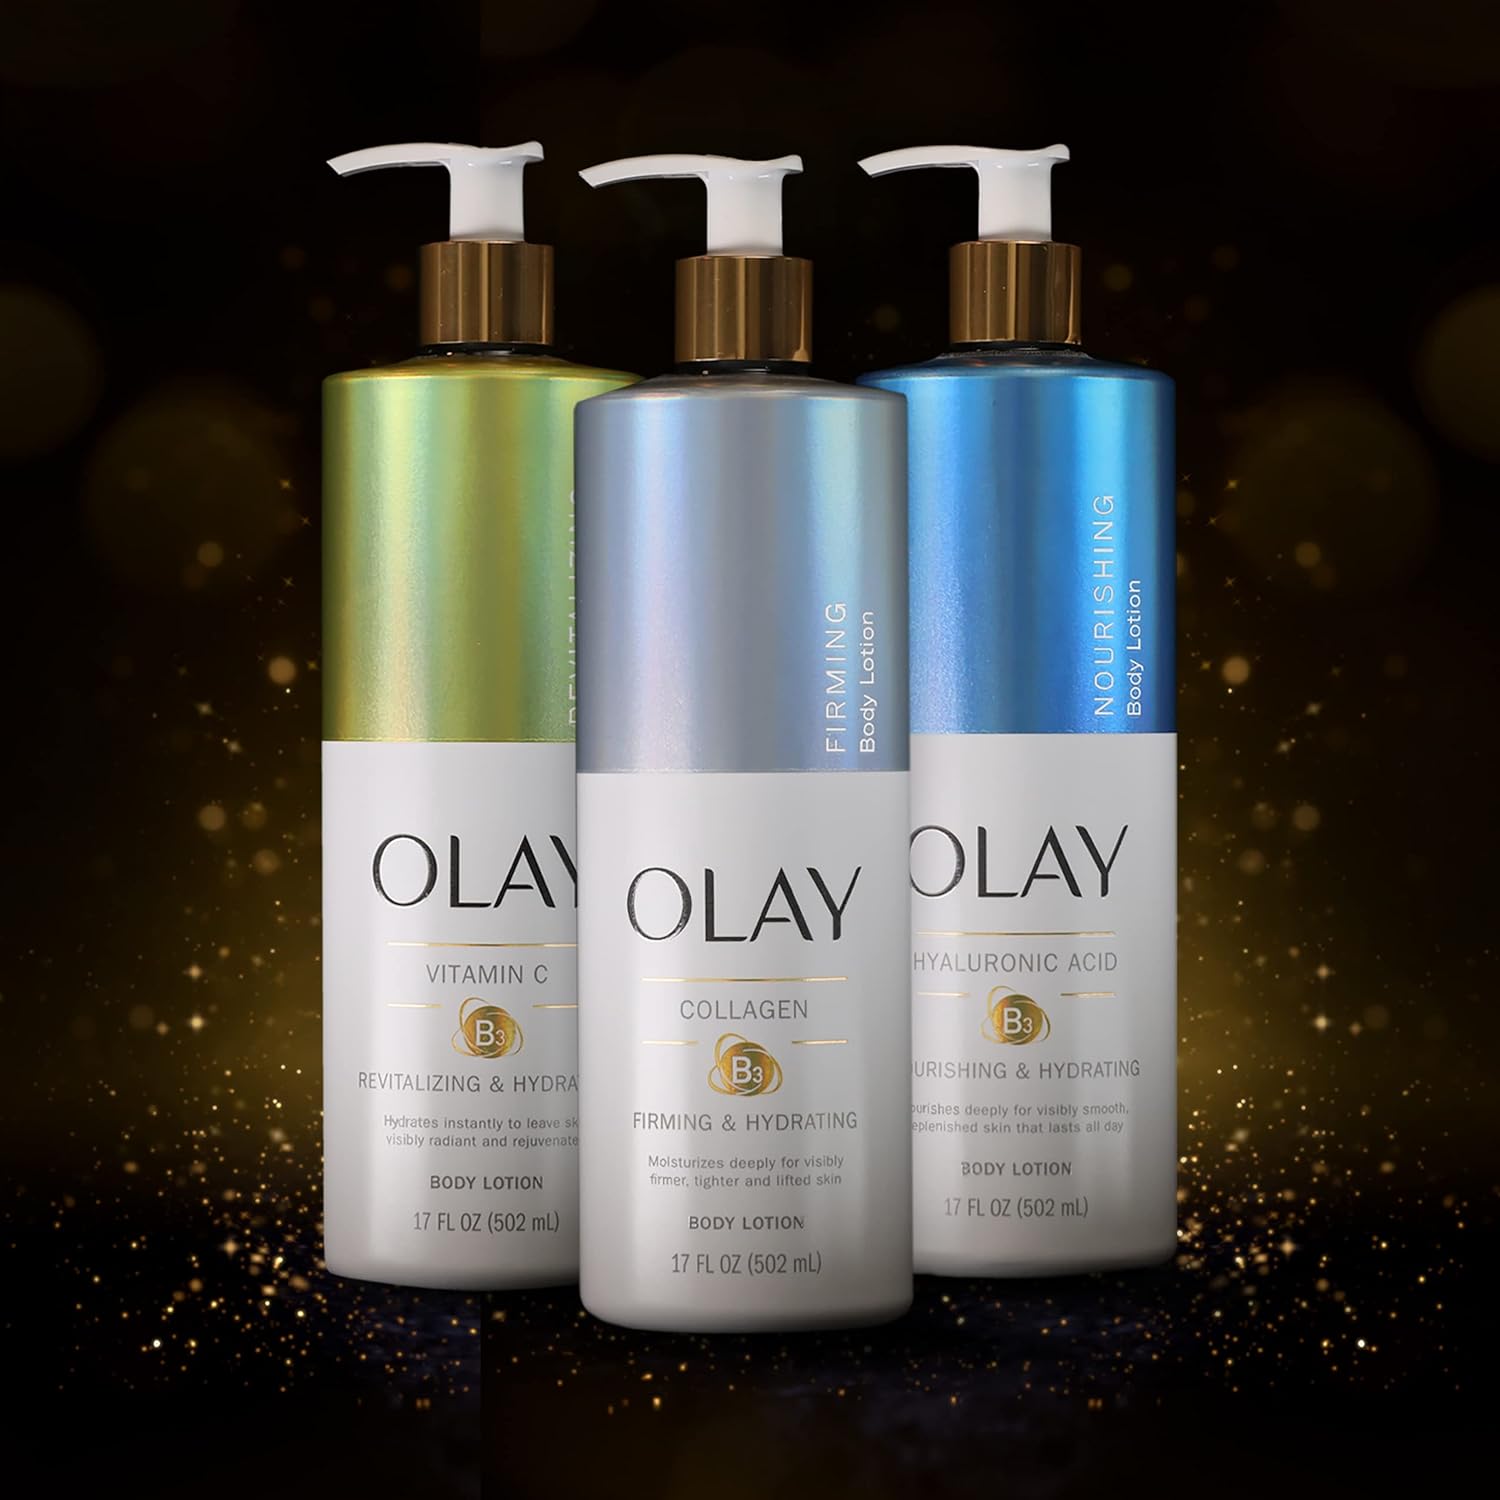 Wholesale prices with free shipping all over United States Olay Nourishing & Hydrating Body Lotion for Women with Hyaluronic Acid 17 fl oz Pump Pack of 4 - Steven Deals